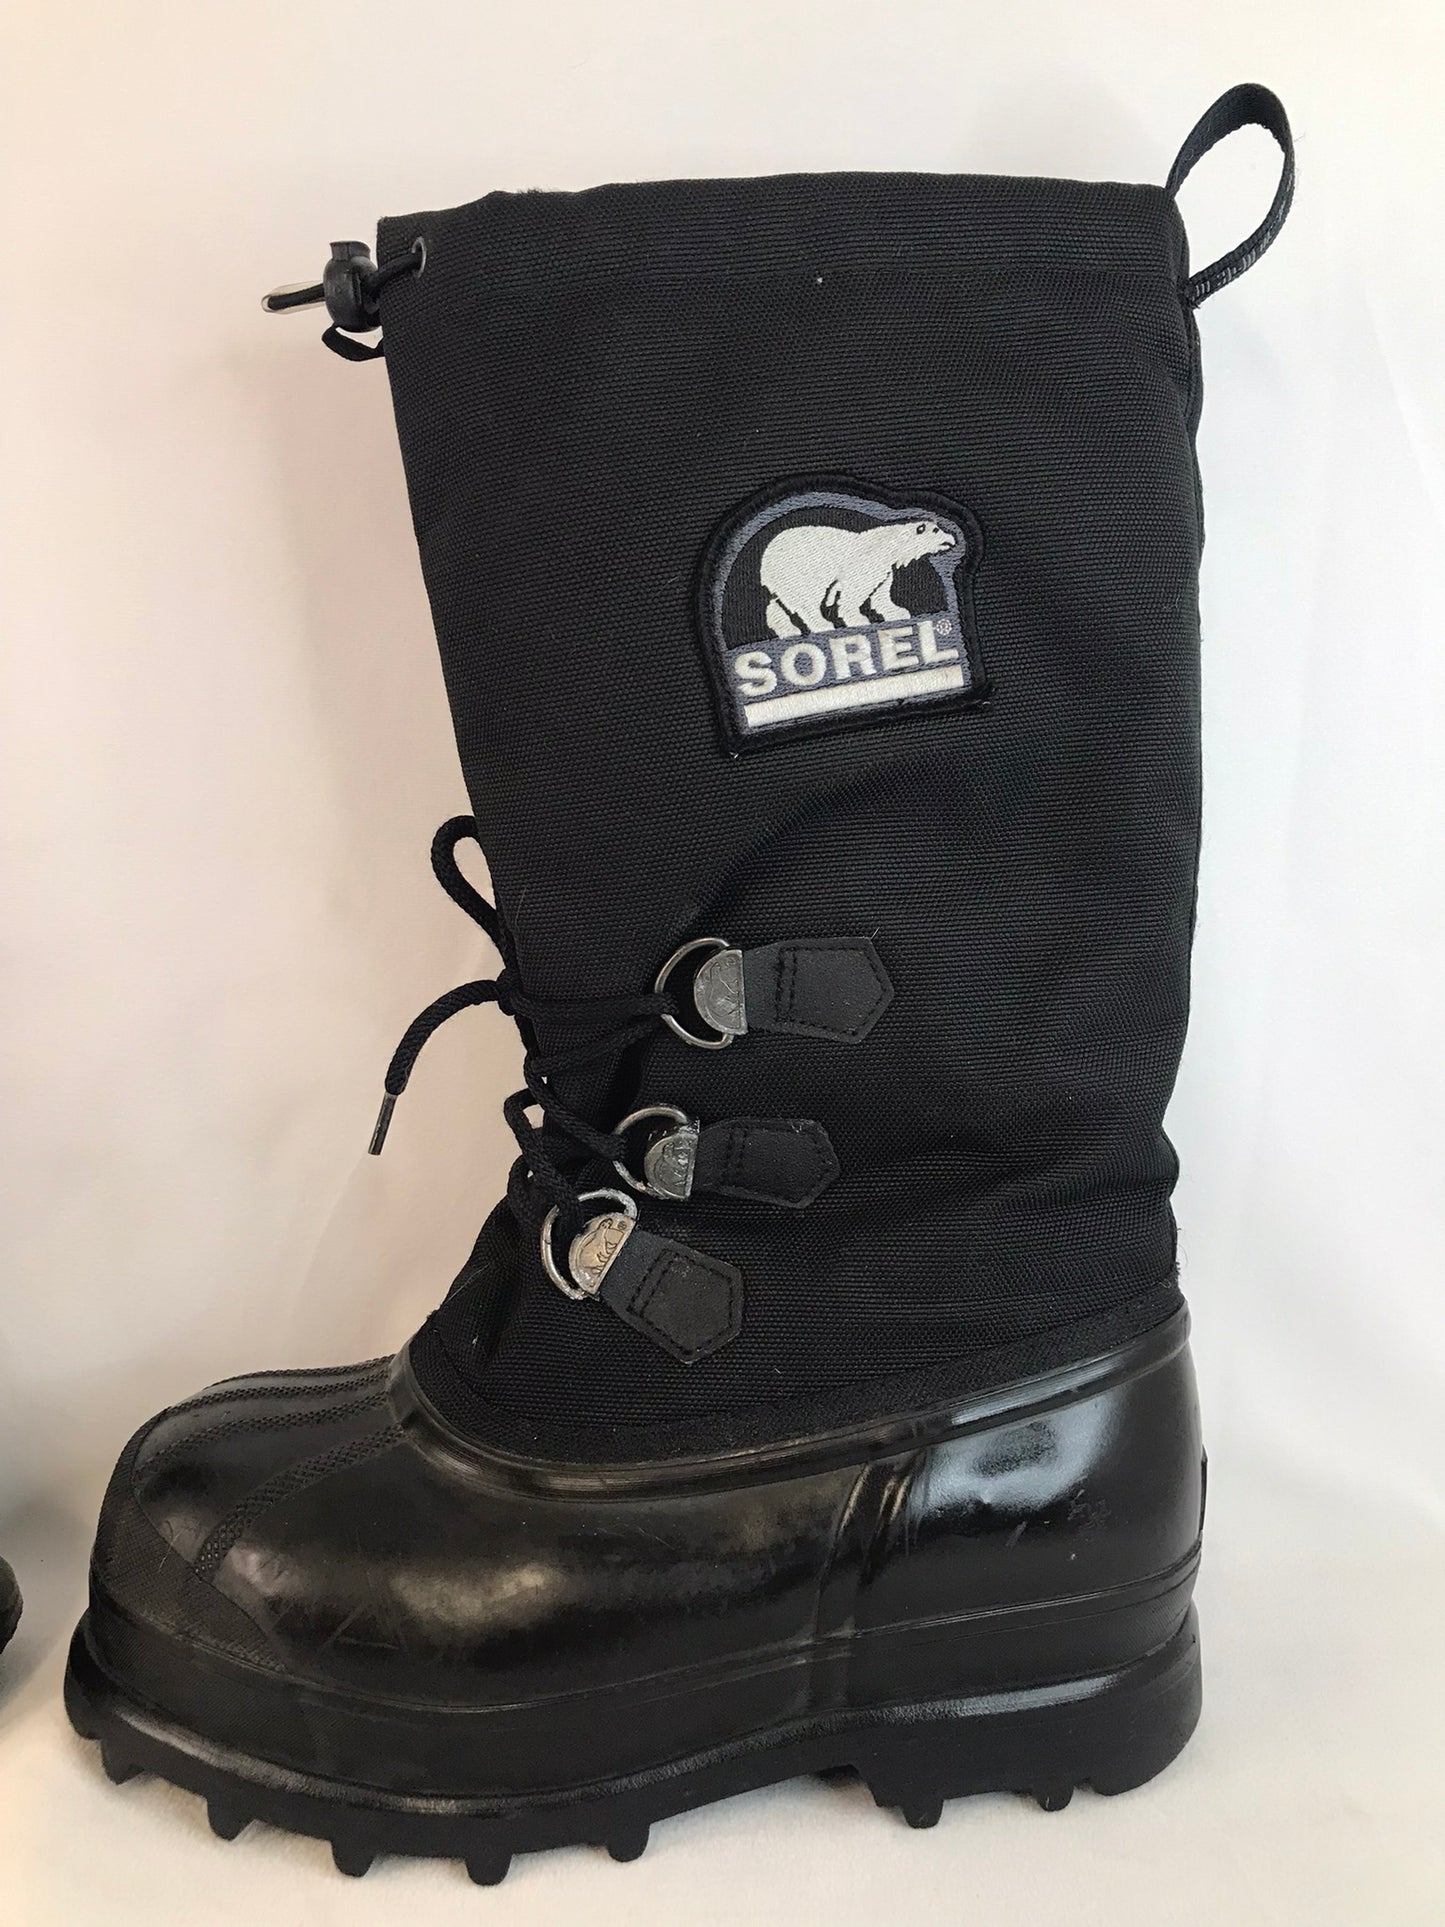 Winter Boots Men's Size 9 Sorel With Liners Black Minor Marks